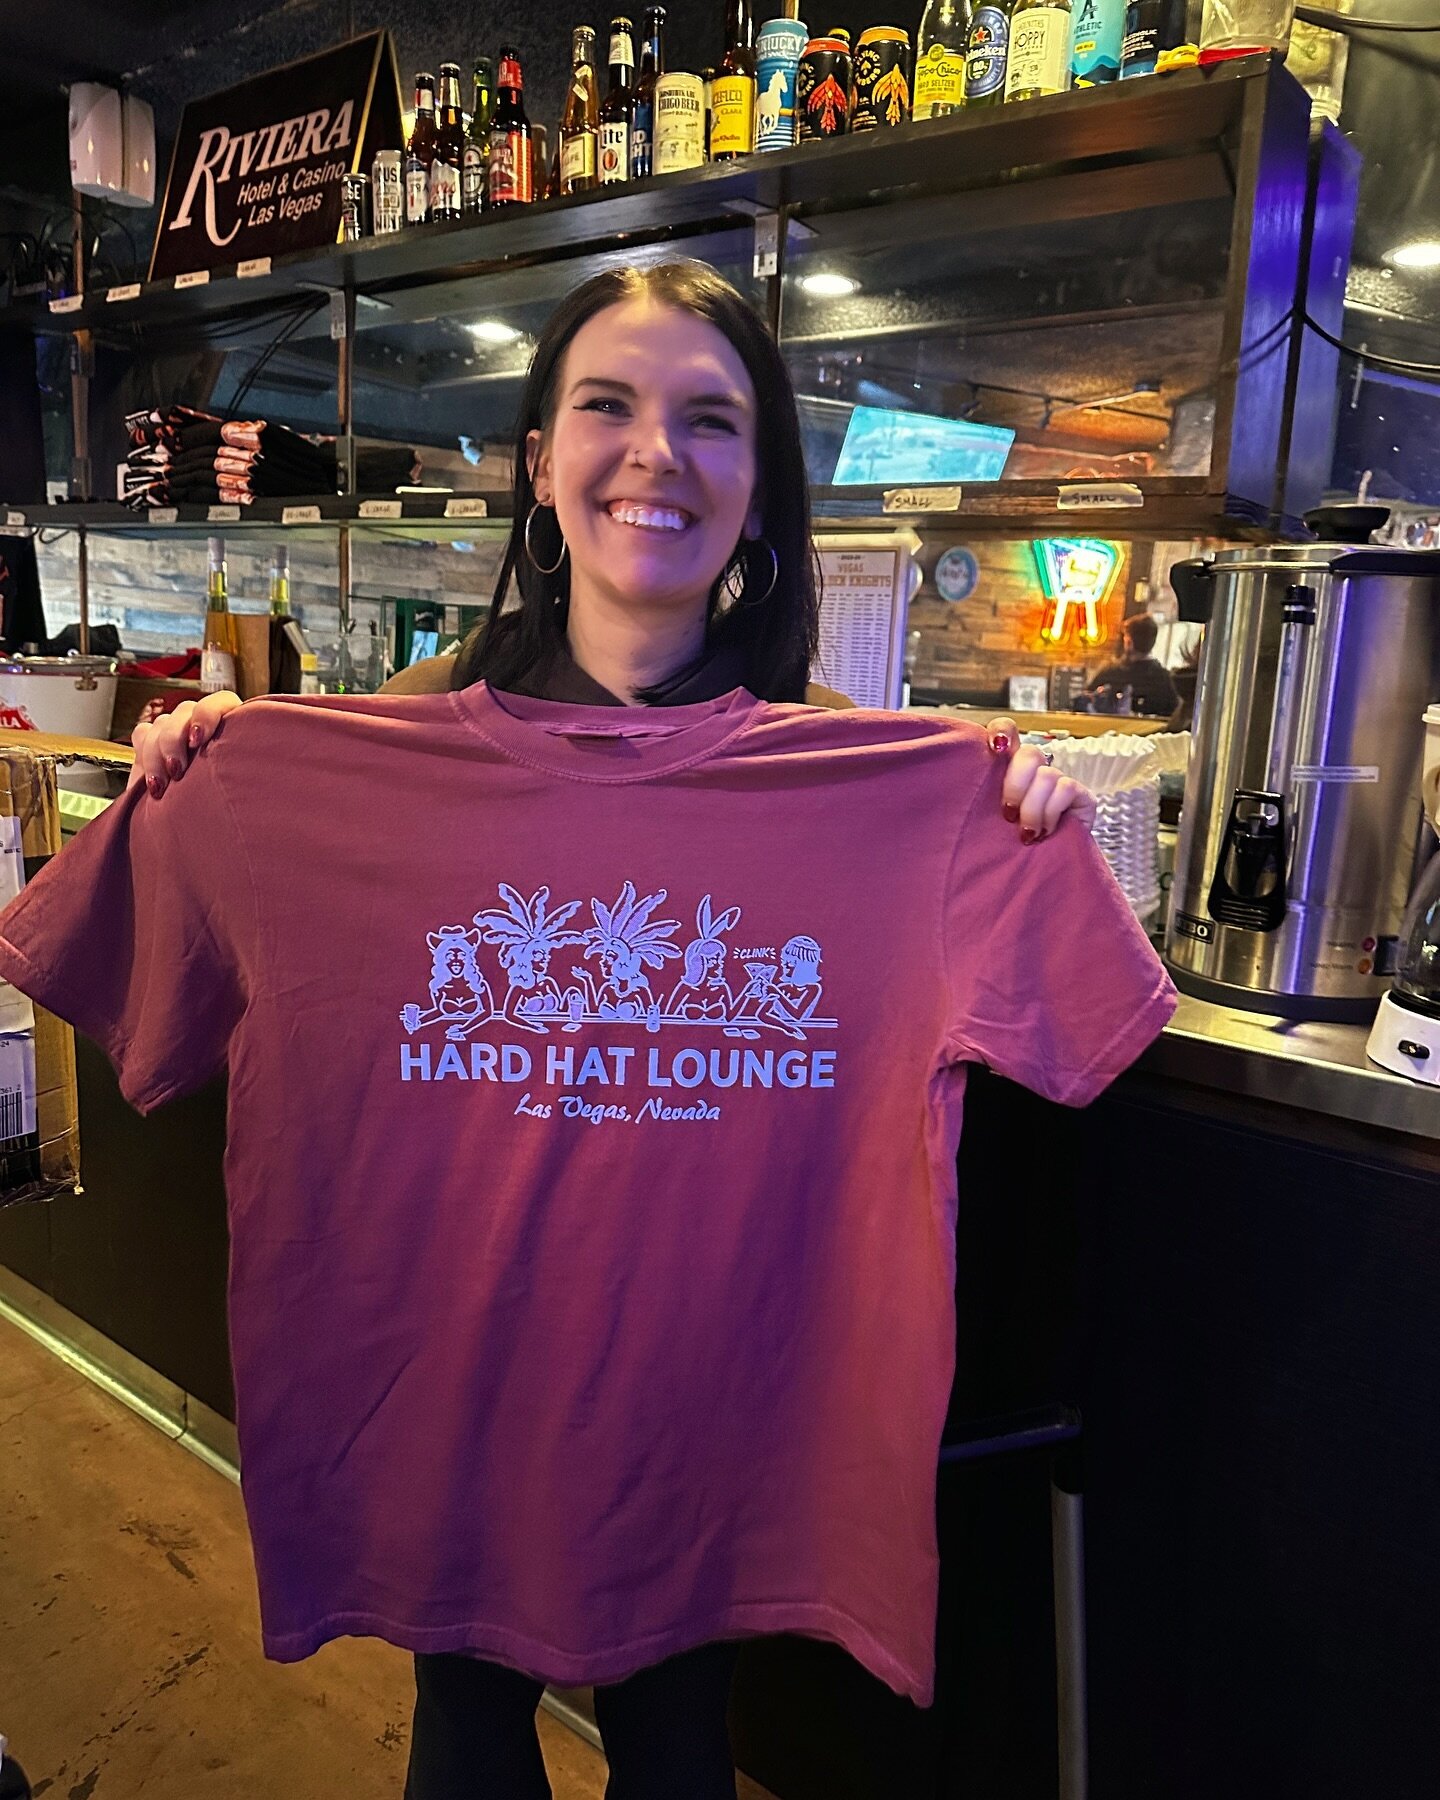 🚨The new colorway of the Showgirl shirt is in stock in all sizes! 

🚨Come down to pick one up for yourself, we&rsquo;re currently working on setting up the online shop to allow for purchase/shipment outside of the bar!

#hardhatlounge #dtlv #lasveg